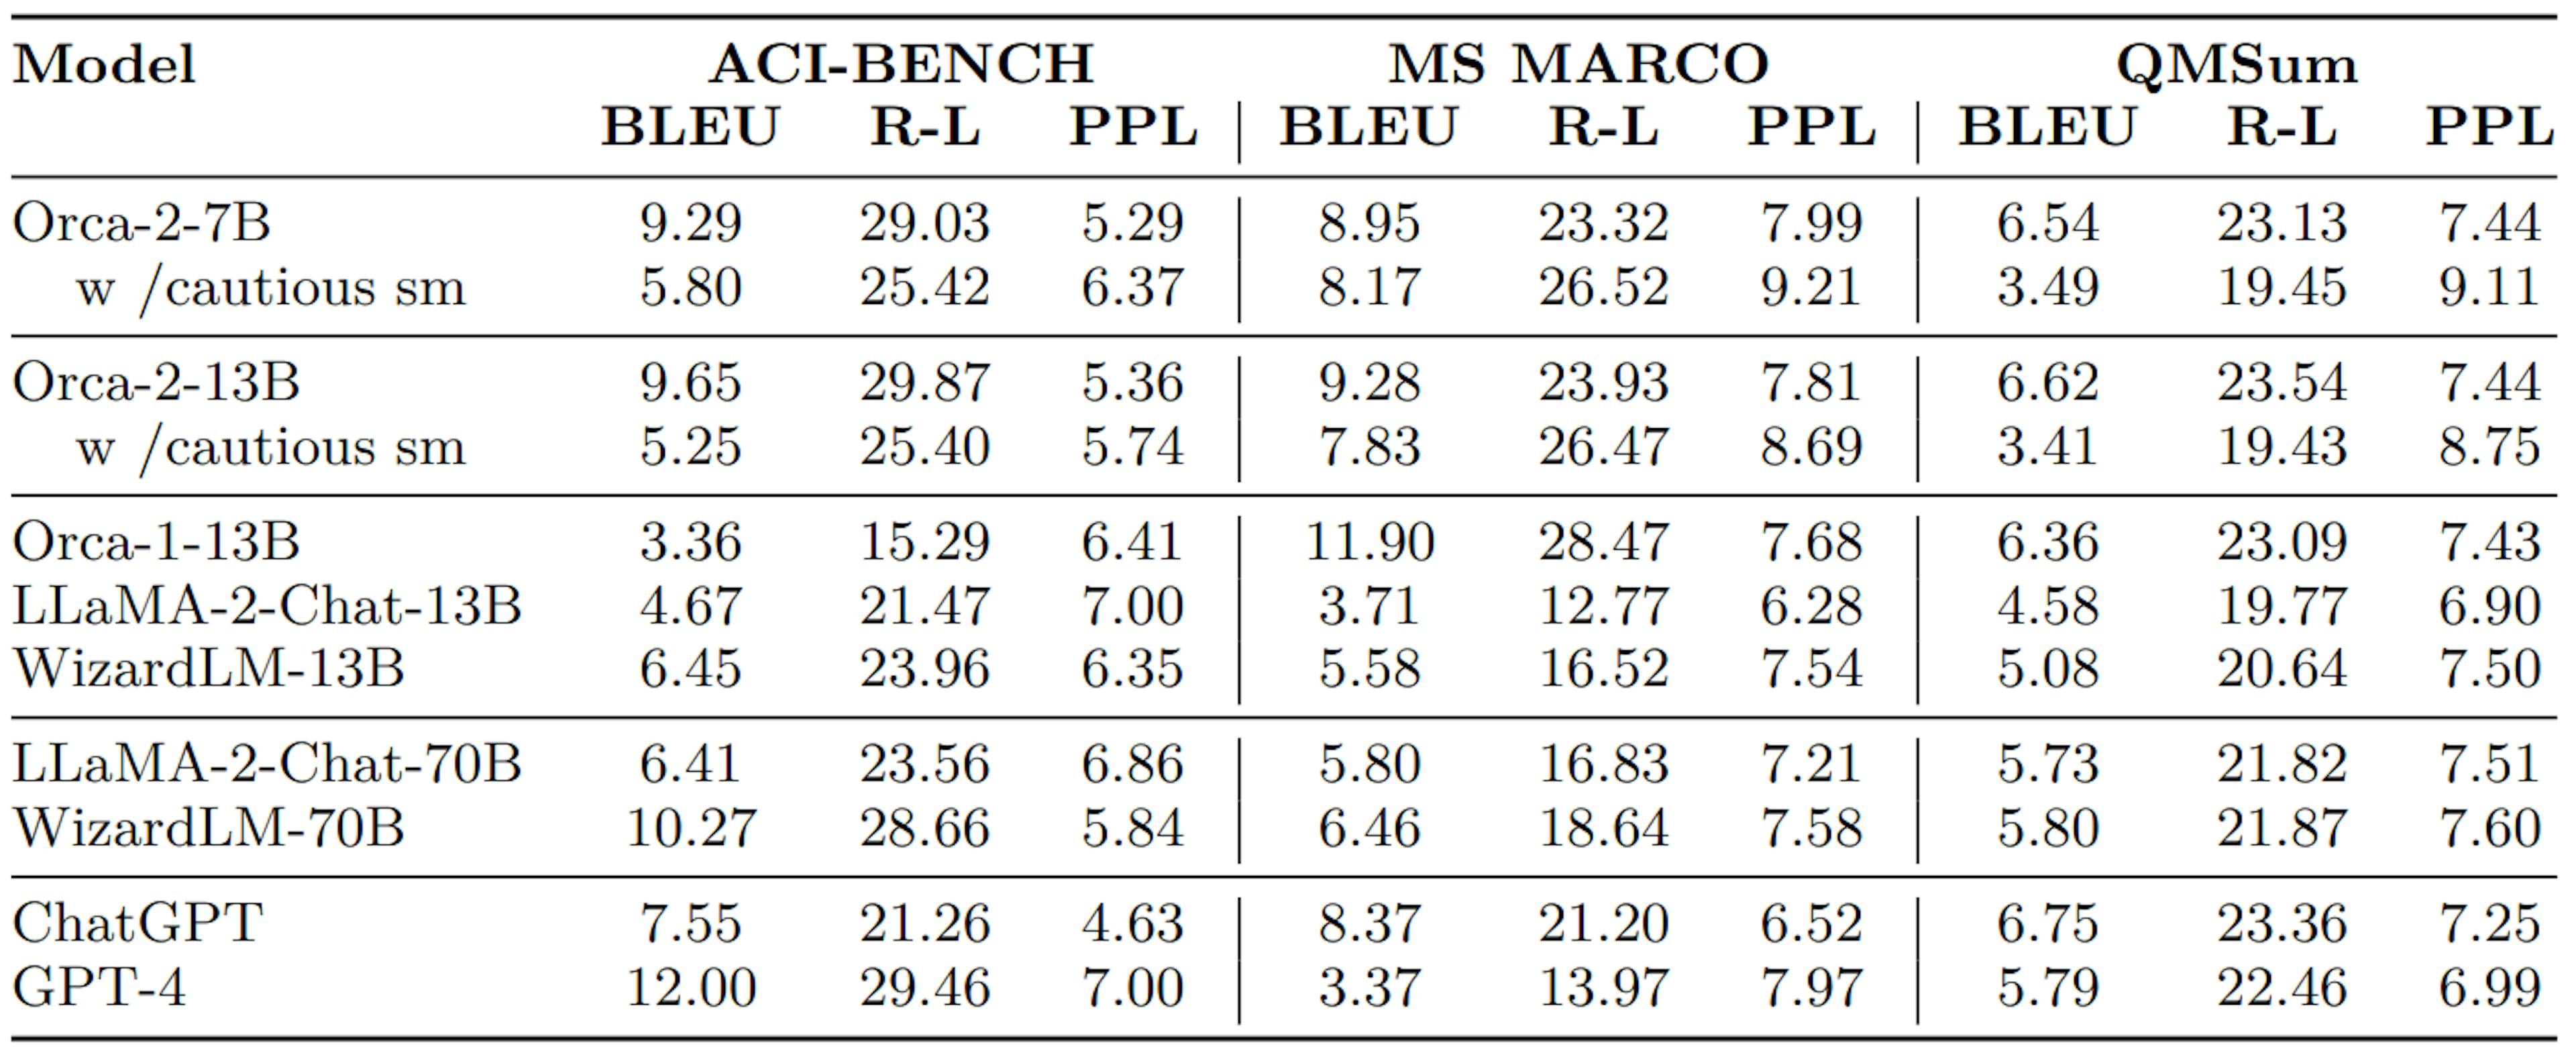 Table 12: Abstractive summarization evaluation using automatic metrics BLEU, Rouge-L (abbreviated as R-L) and Perplexity (abbreviated as PPL). For perplexity, the lower is better. Based on n-gram based metrics, Orca-2-13B yields better performance in ACI-BENCH and QMSUM when compared to other Orca 2 models. Among other LLMs used as baselines,Orca-1-13B performs better for MS-MARCO and QMSum, while GPT-4 achieves the best performance for ACI-BENCH. Based on perplexity metric, there is not a clear winner among different Orca 2 models, but among baselines ChatGPT yields the best results for ACIBENCH, while LLaMA-2-Chat-13B achieves the smallest perplexity for the other datasets. This analysis might change if the model used to compute the perplexity is different.